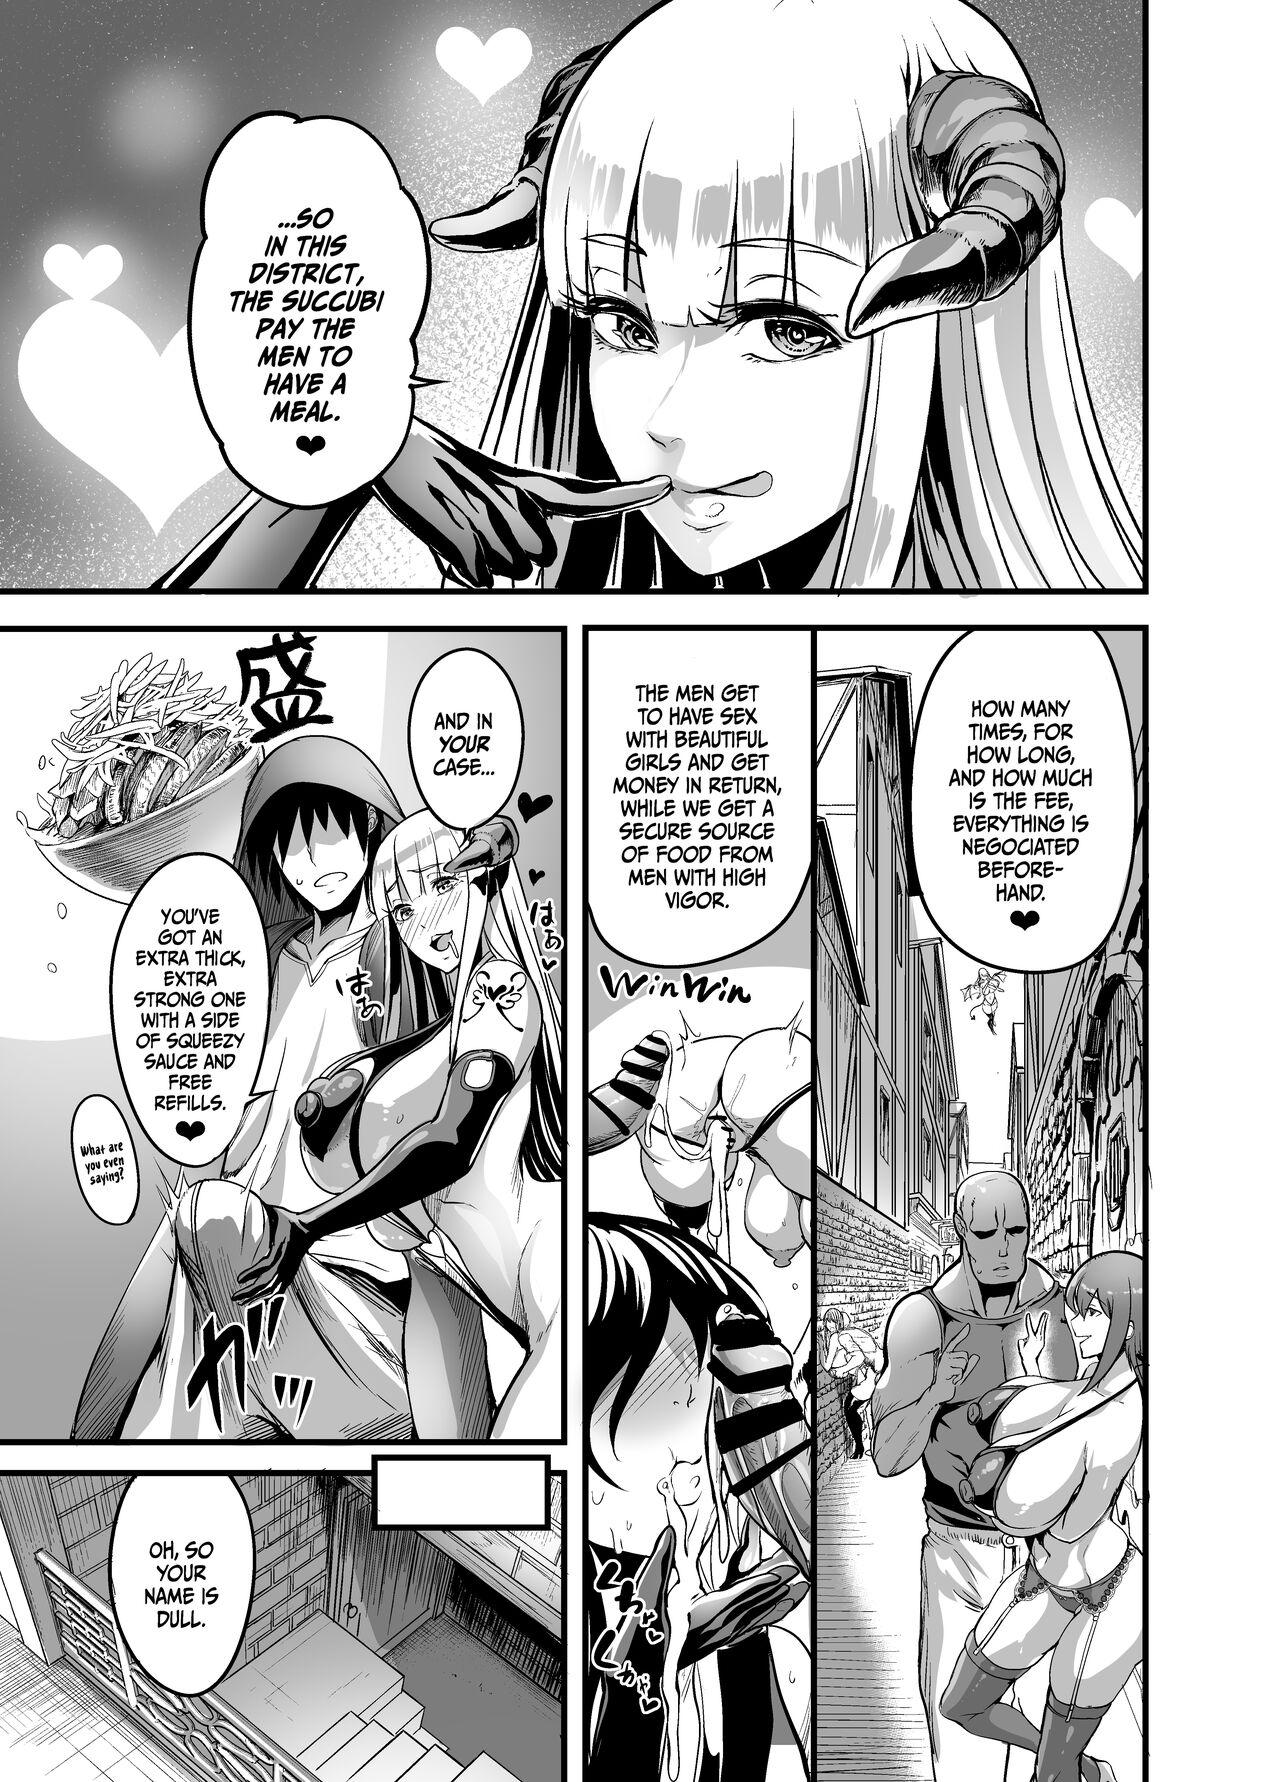 Safadinha Youkoso Succubus Machi e! | Welcome to Succubus District! Sex Pussy - Page 6